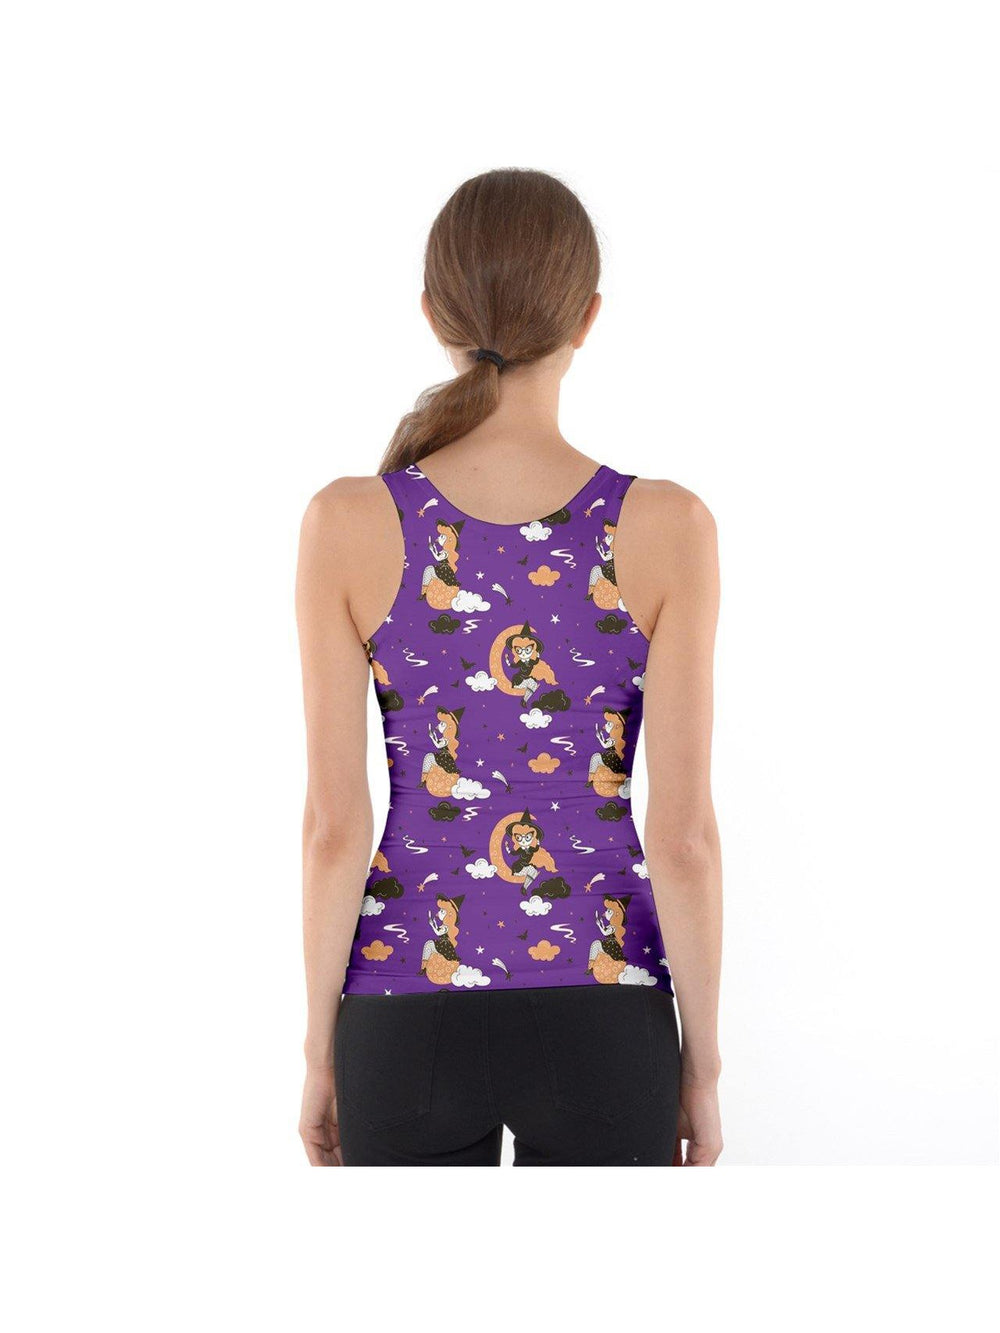 PINUP WITCH PURPLE Tank Top